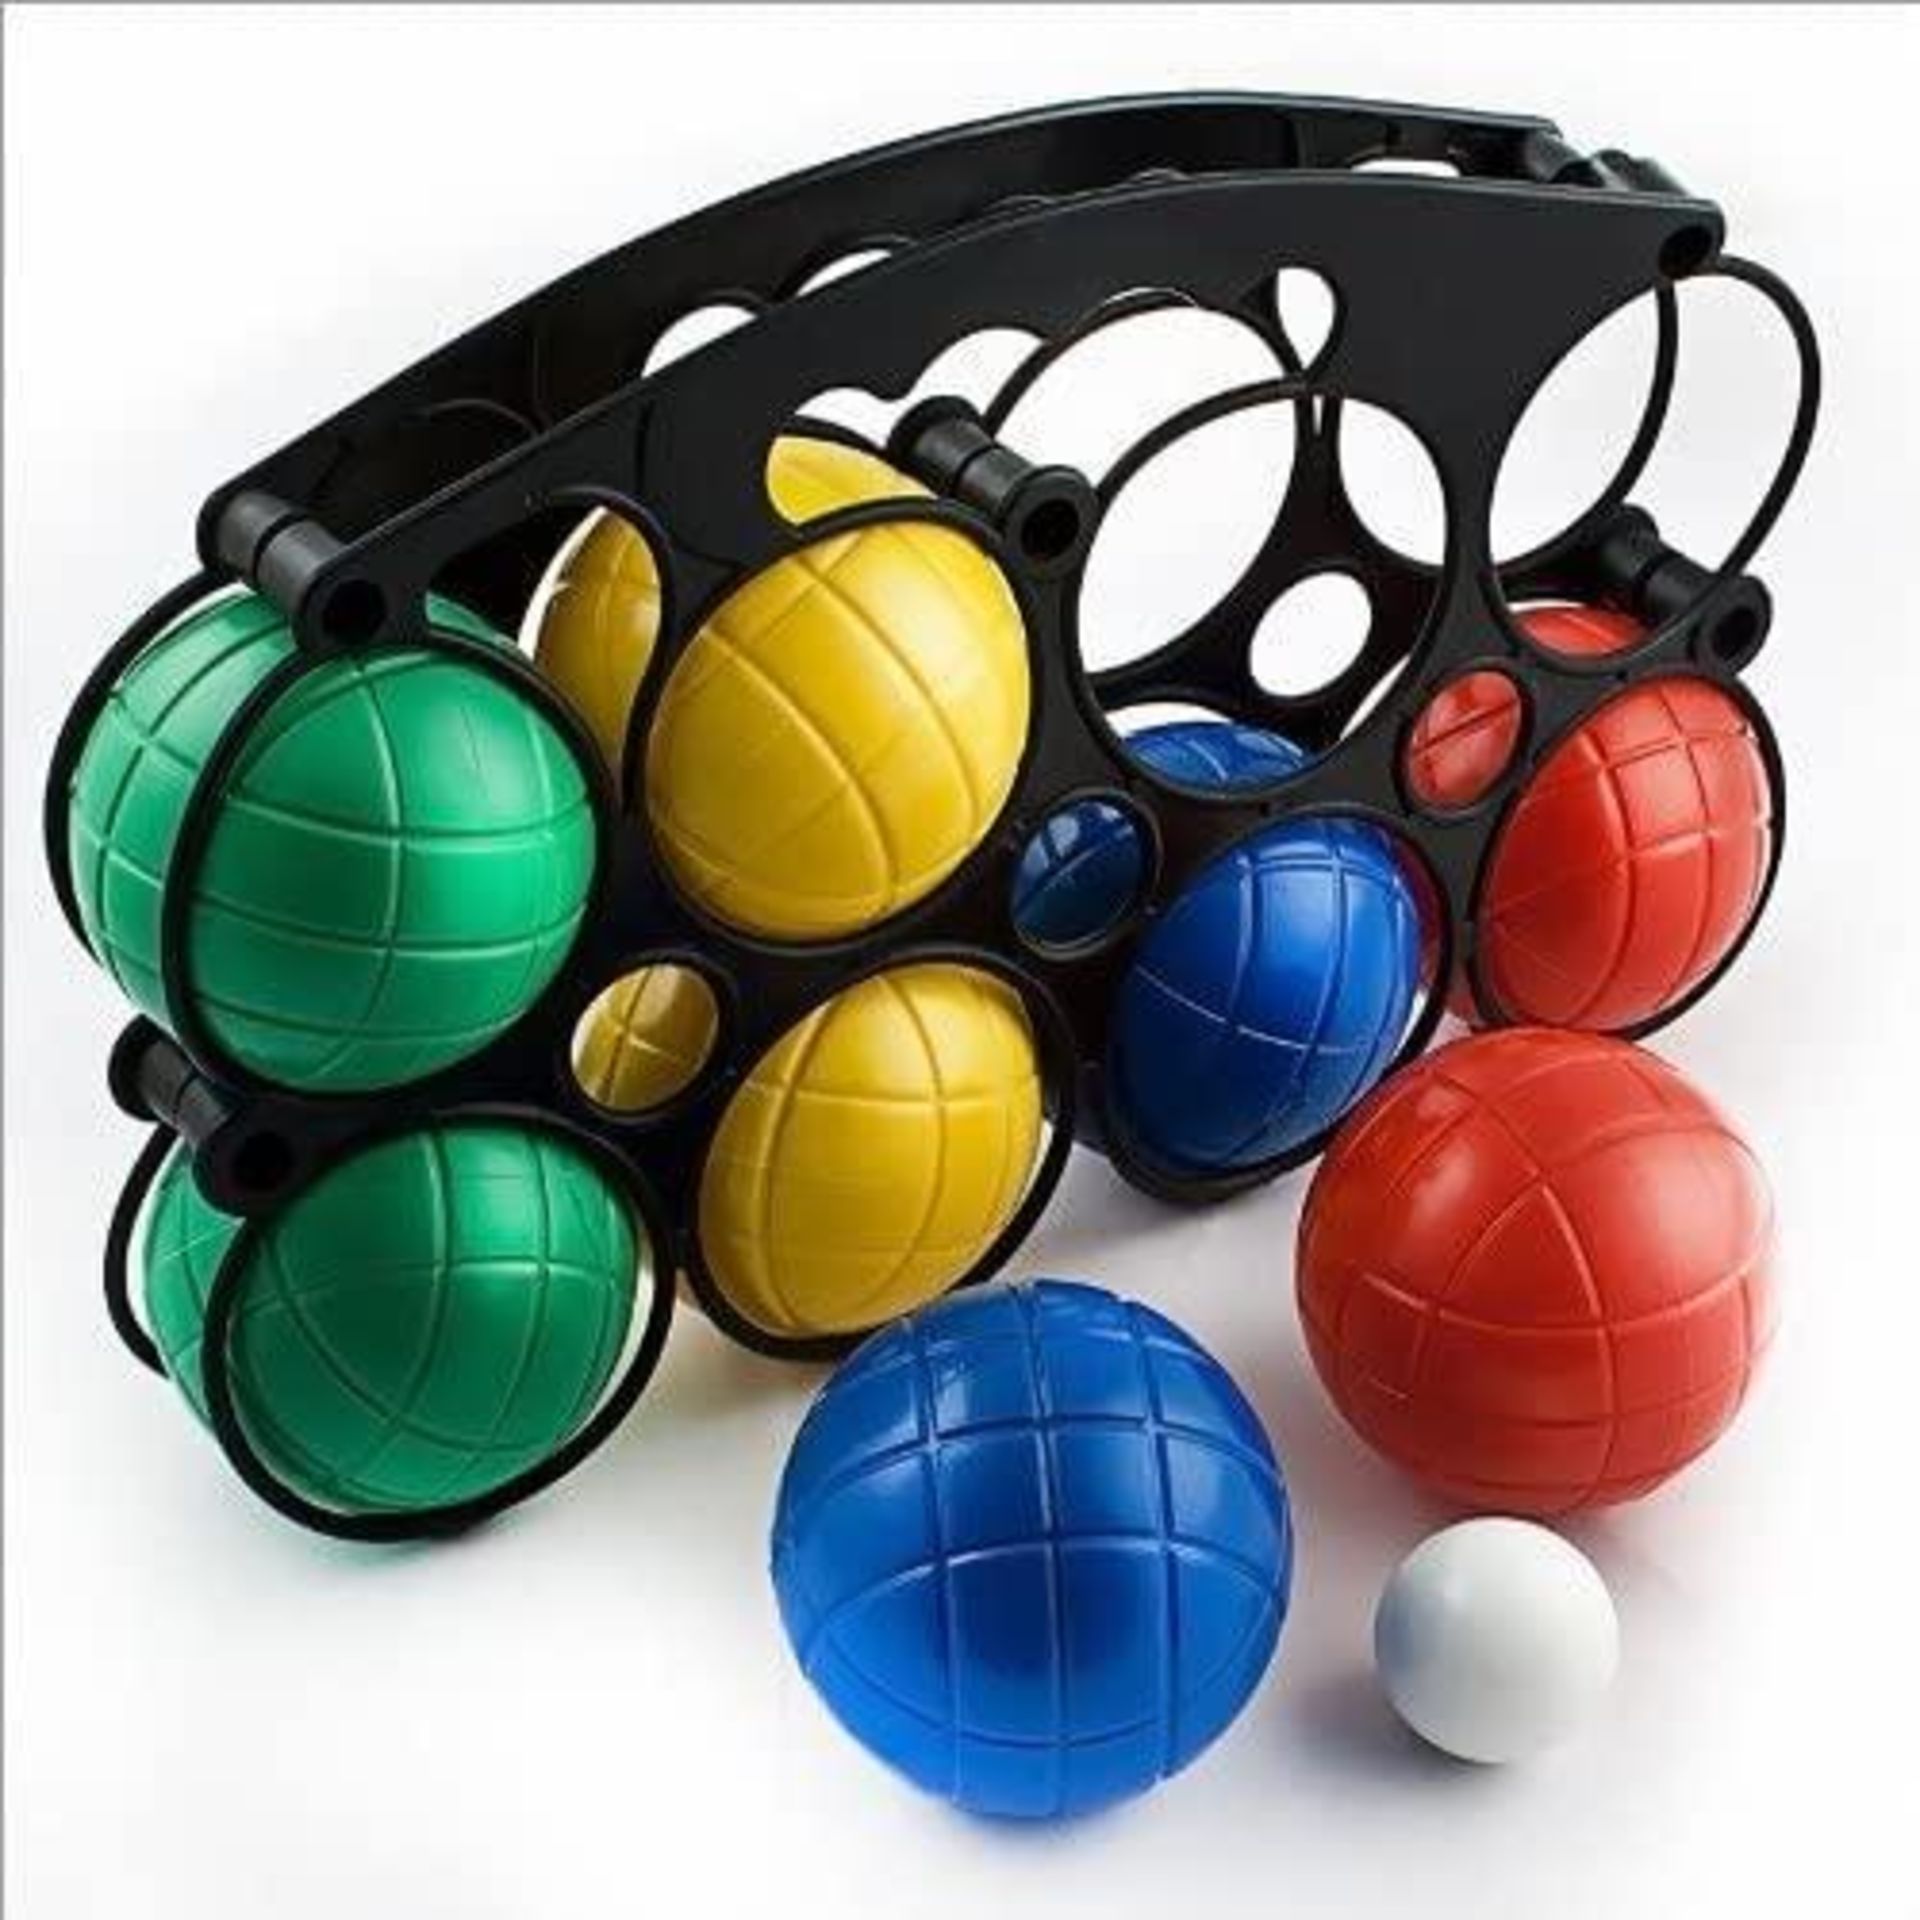 Boccia Boules Set with 8 Balls in 4 Colours, Jack and Bowls Carry Holder £6.95 RRP